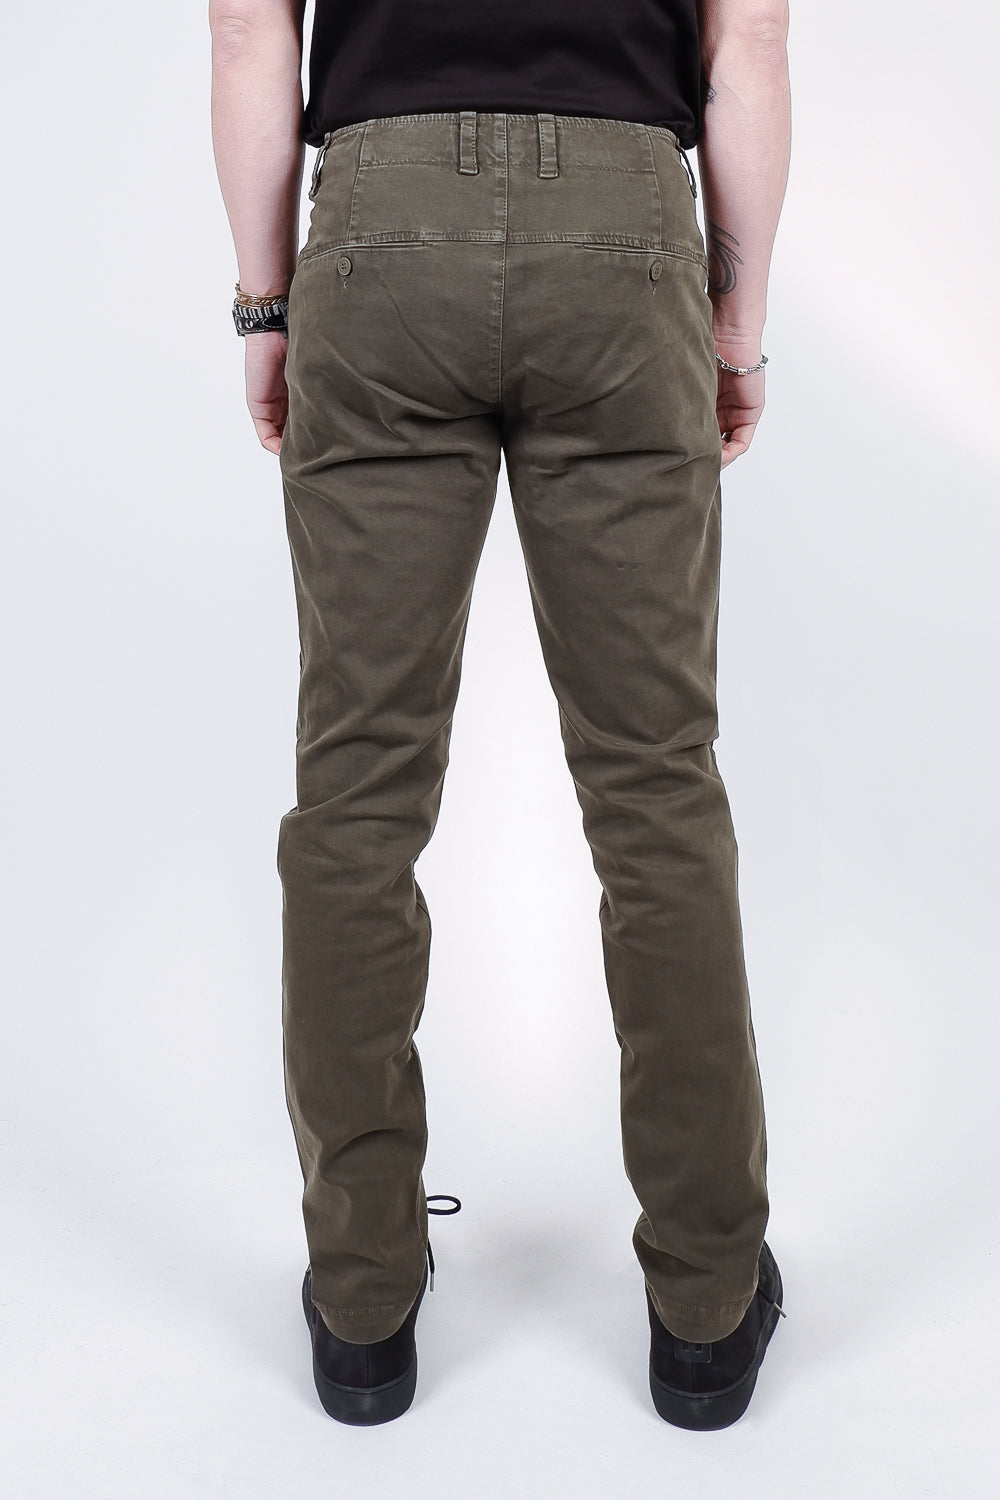 Buy the Transit Cotton Stretch Regular Fit Chinos in Khaki at Intro. Spend £50 for free UK delivery. Official stockists. We ship worldwide.